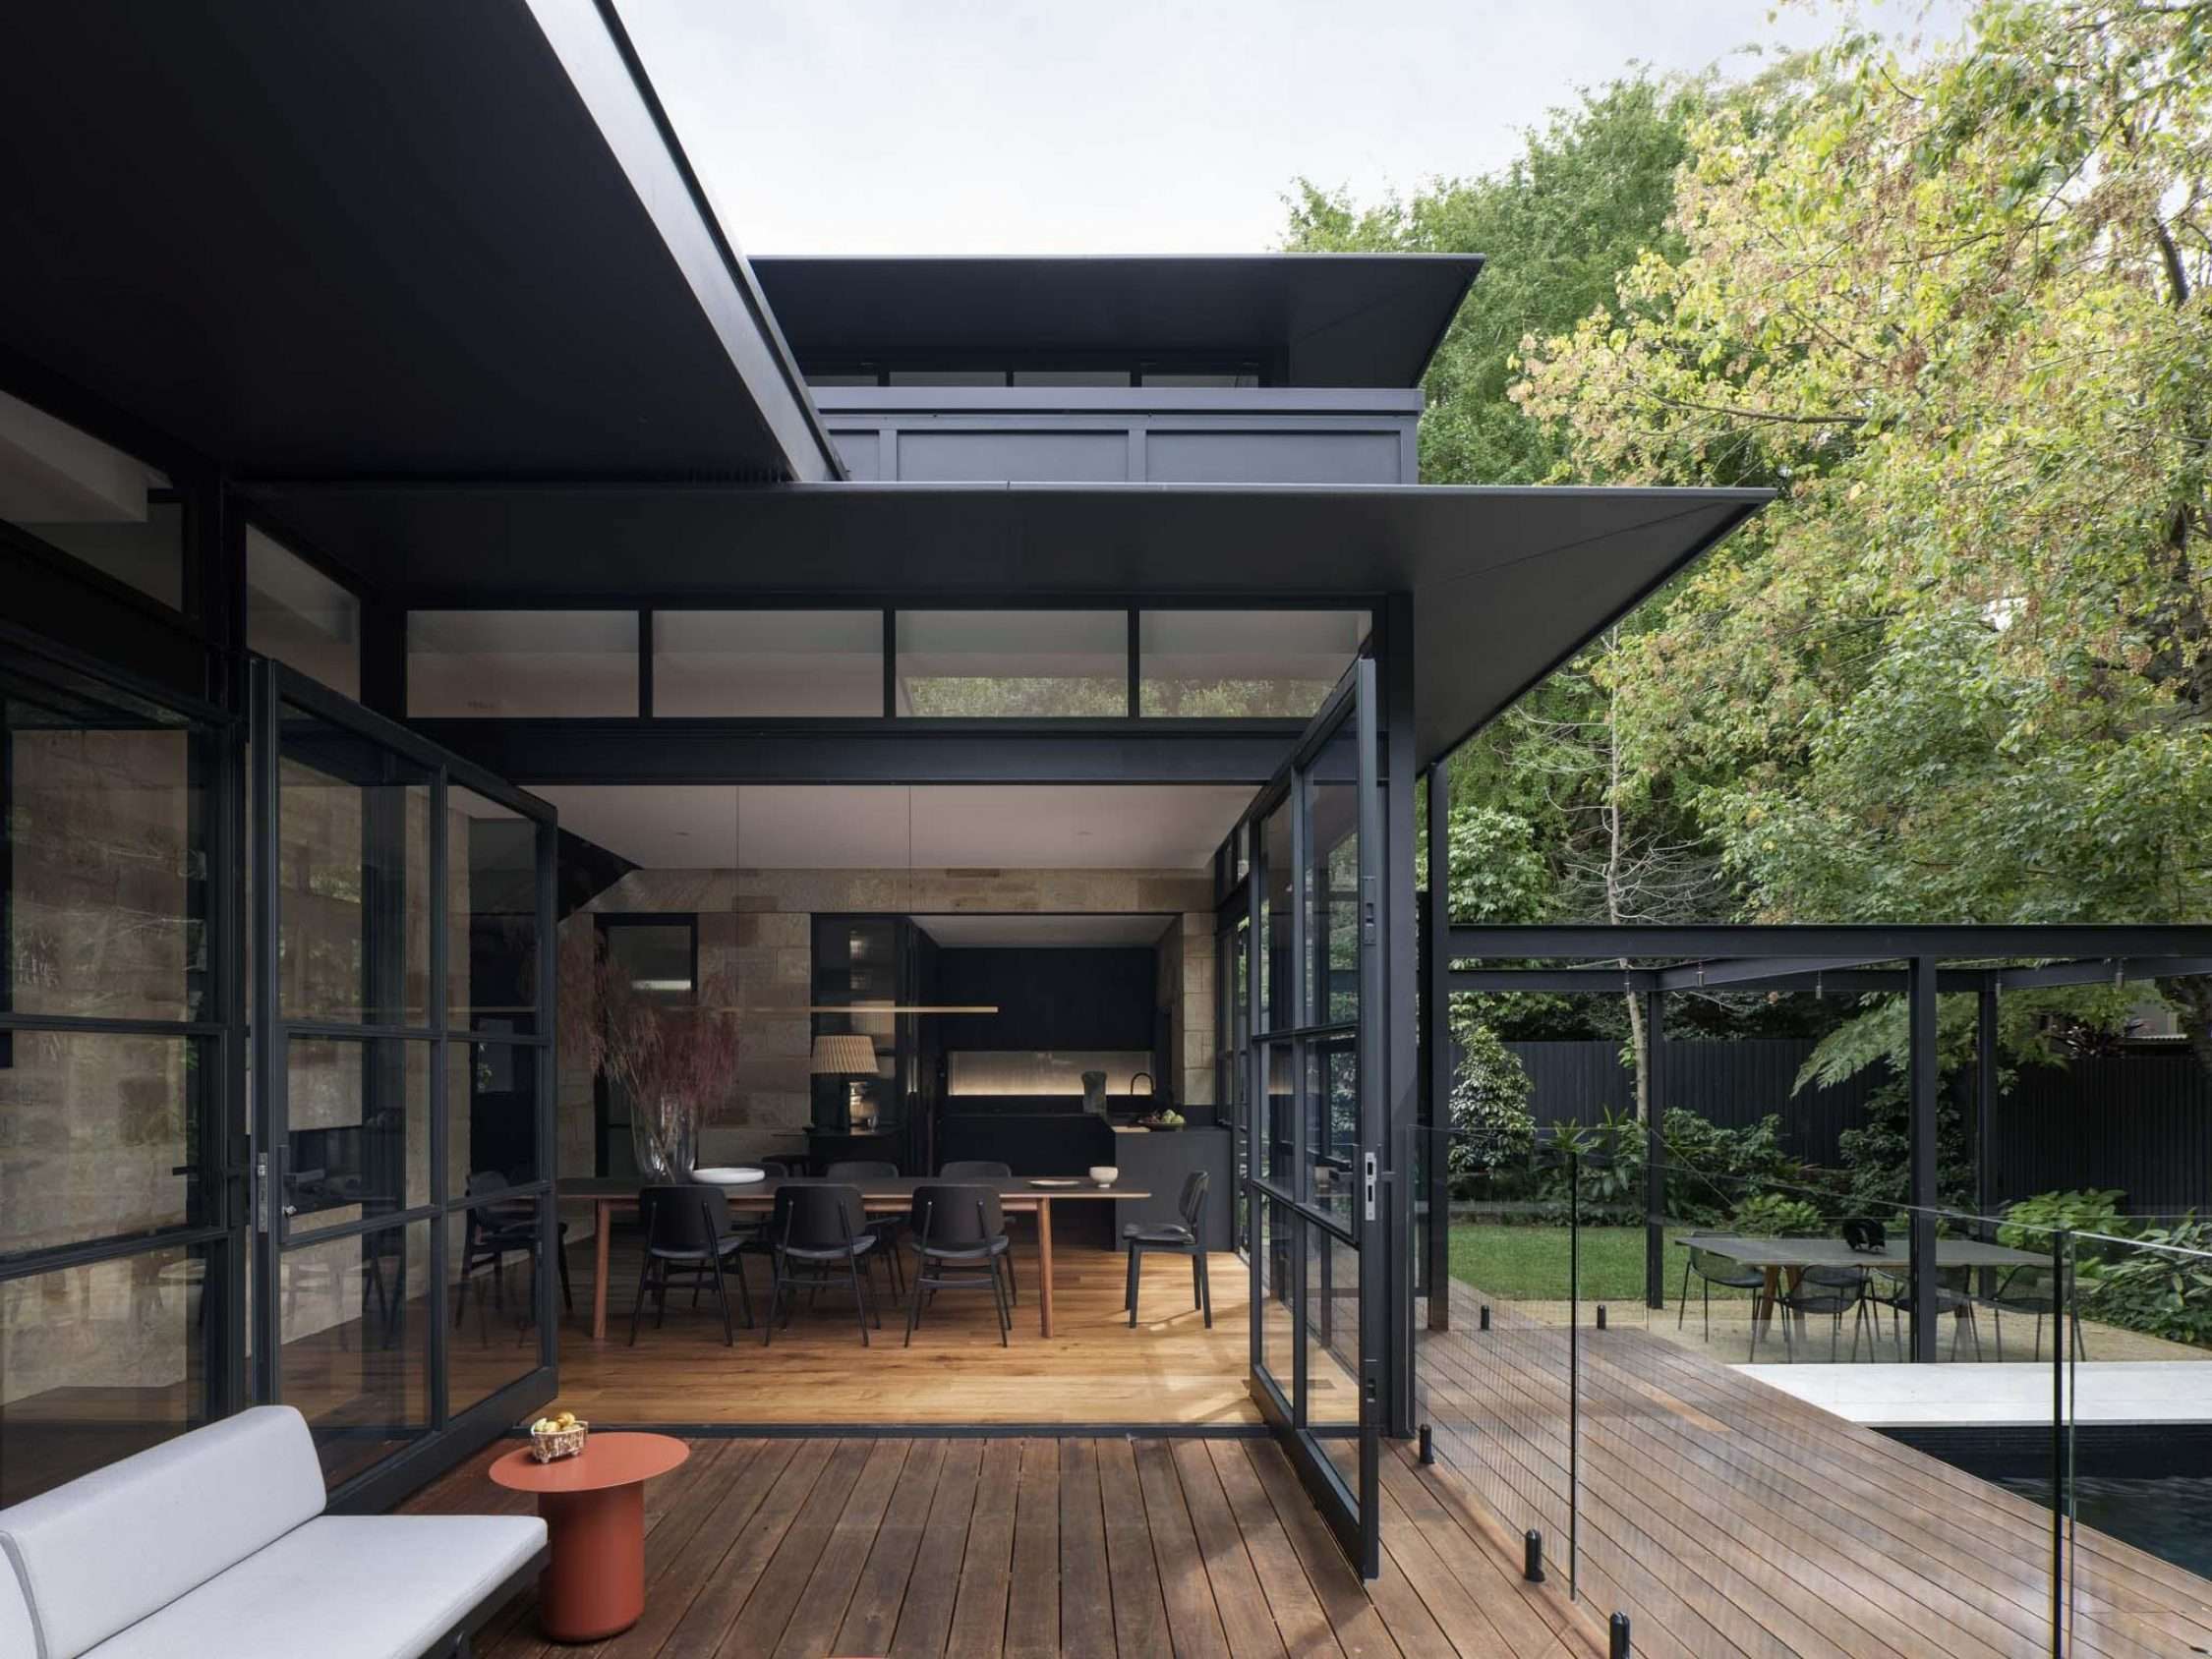 Maranatha House by BIJL Architecture showing inside outside connection to deck and pool area from the kitchen / dining space